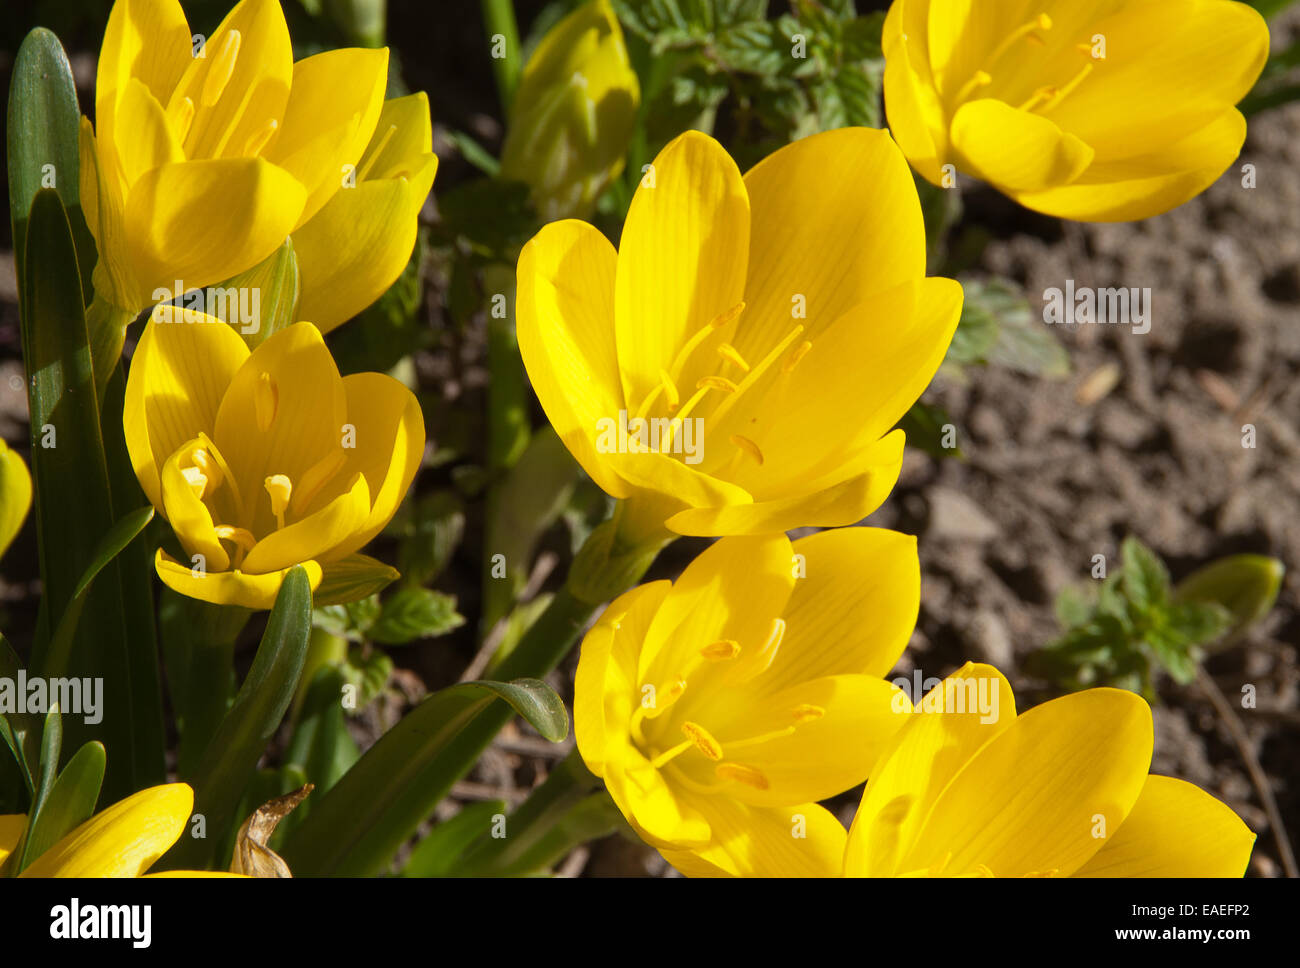 The plant Sternbergia lutea photographed in the garden in the park. The plant is autumn and has beautiful yellow flowers. Stock Photo